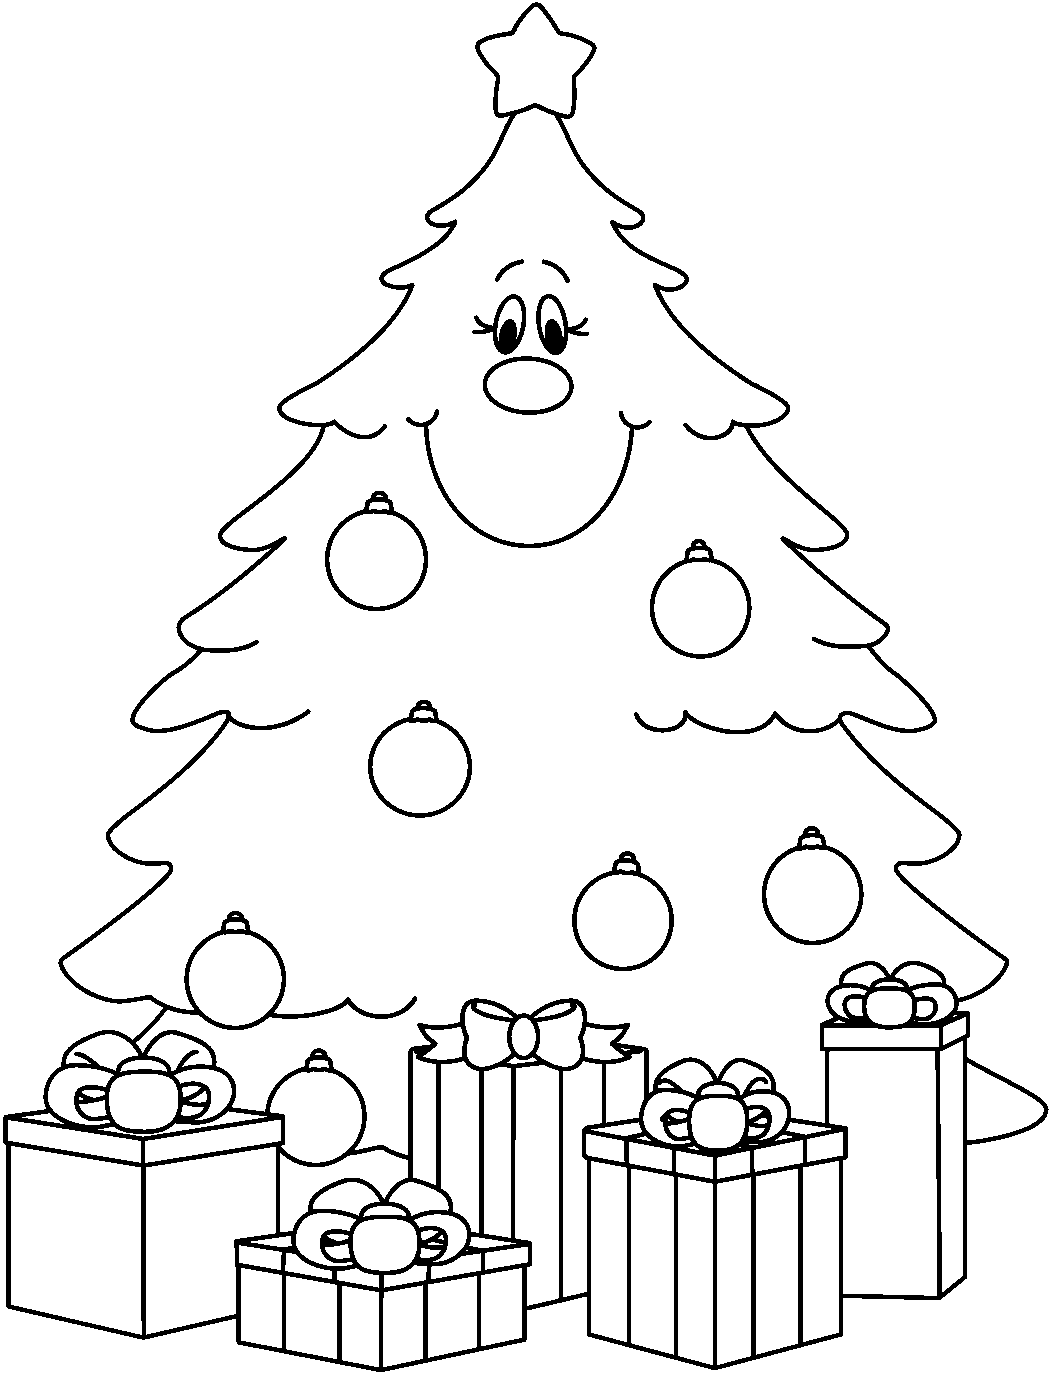 Christmas ornament  black and white christmas black and white clip art country